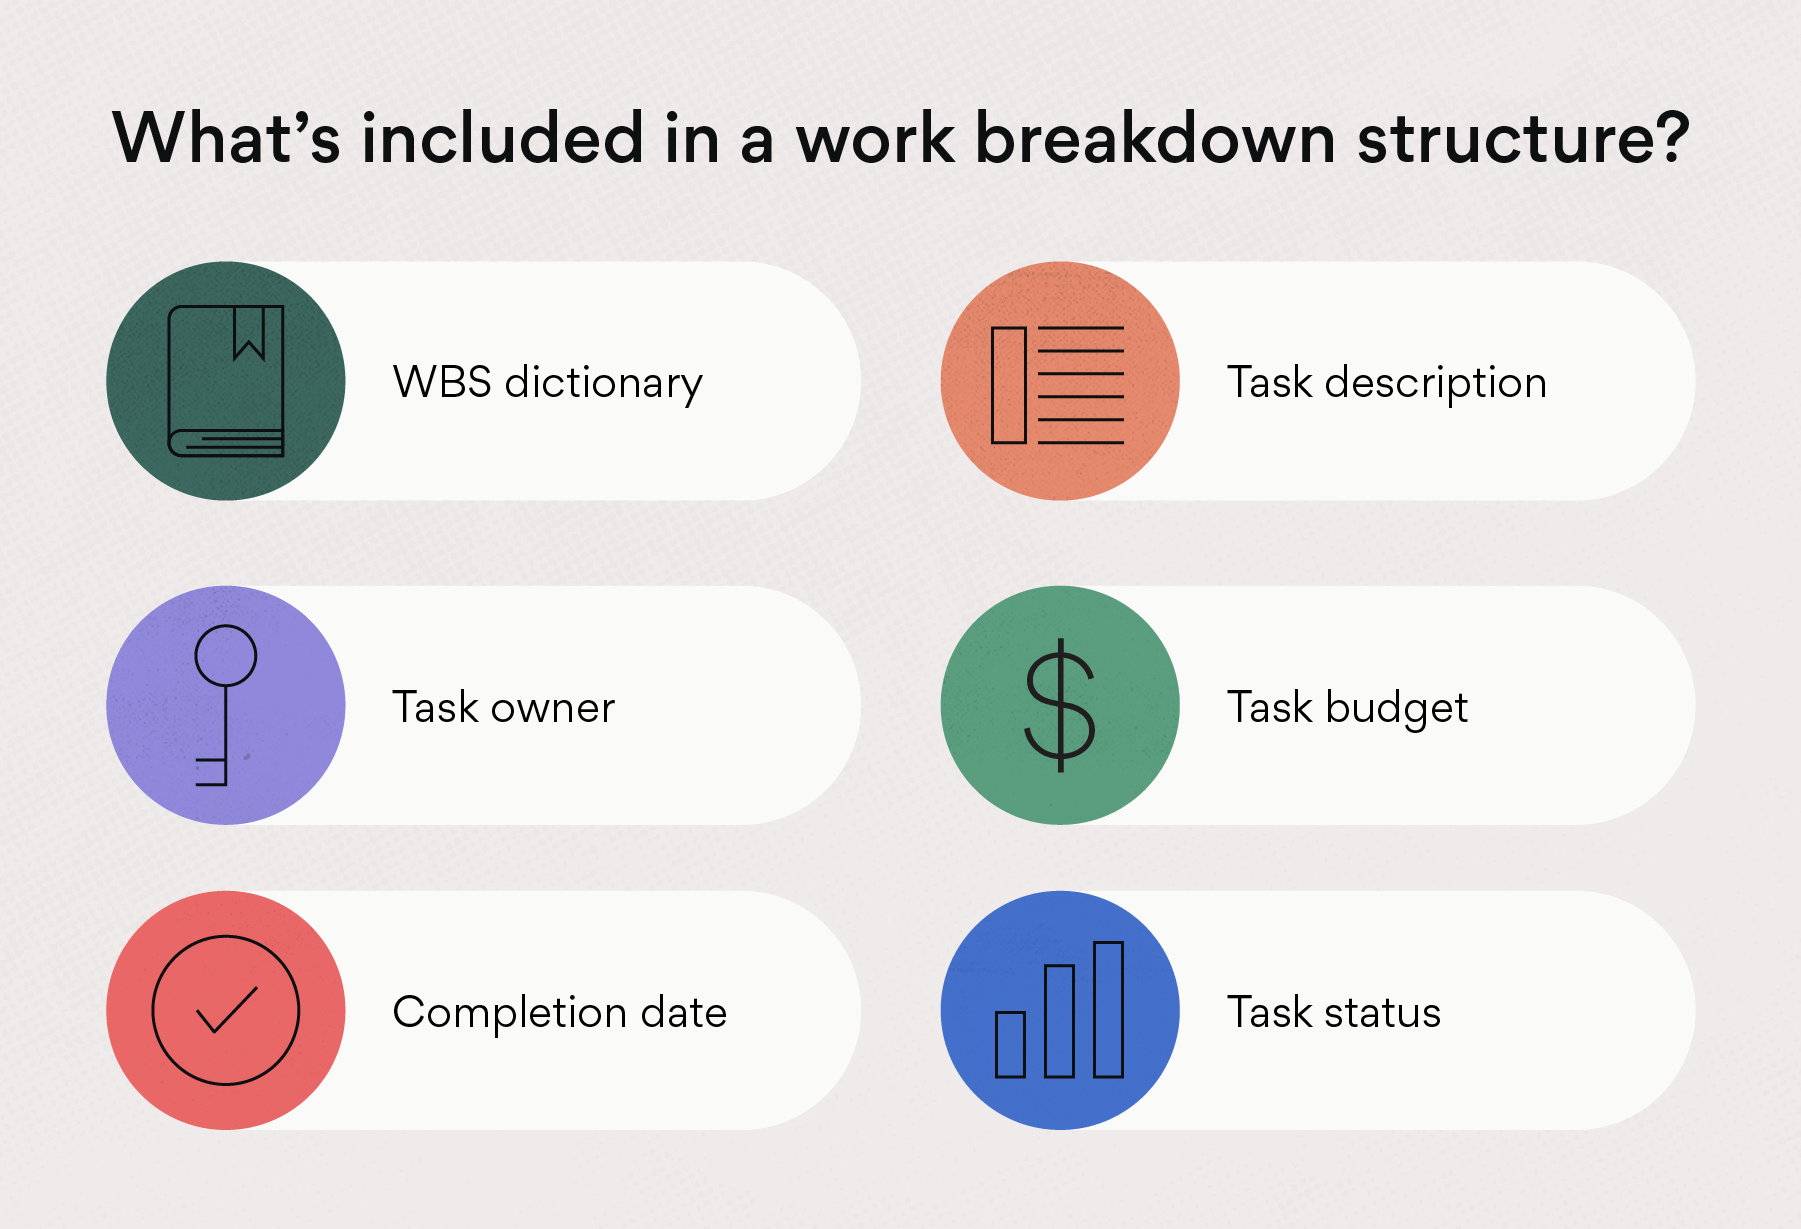 What’s included in a work breakdown structure?